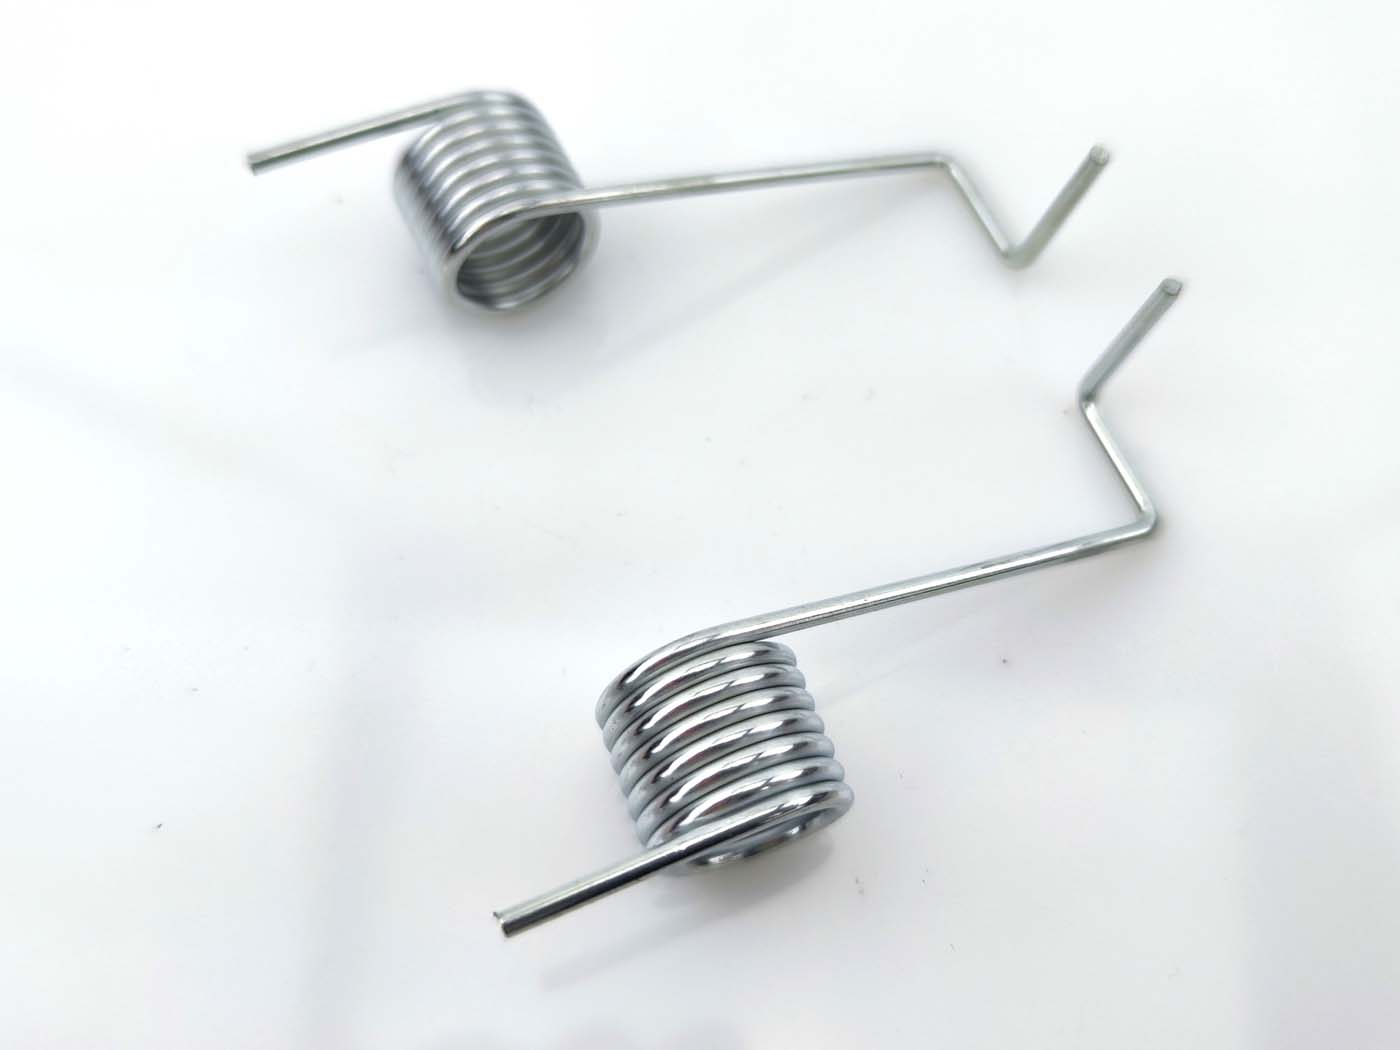 Main Stand Springs For DKW Hummel, Super Victoria Vicky Standard, Zweirad Union Types 101, 102, 112, 113, 116, 117, 126, 156